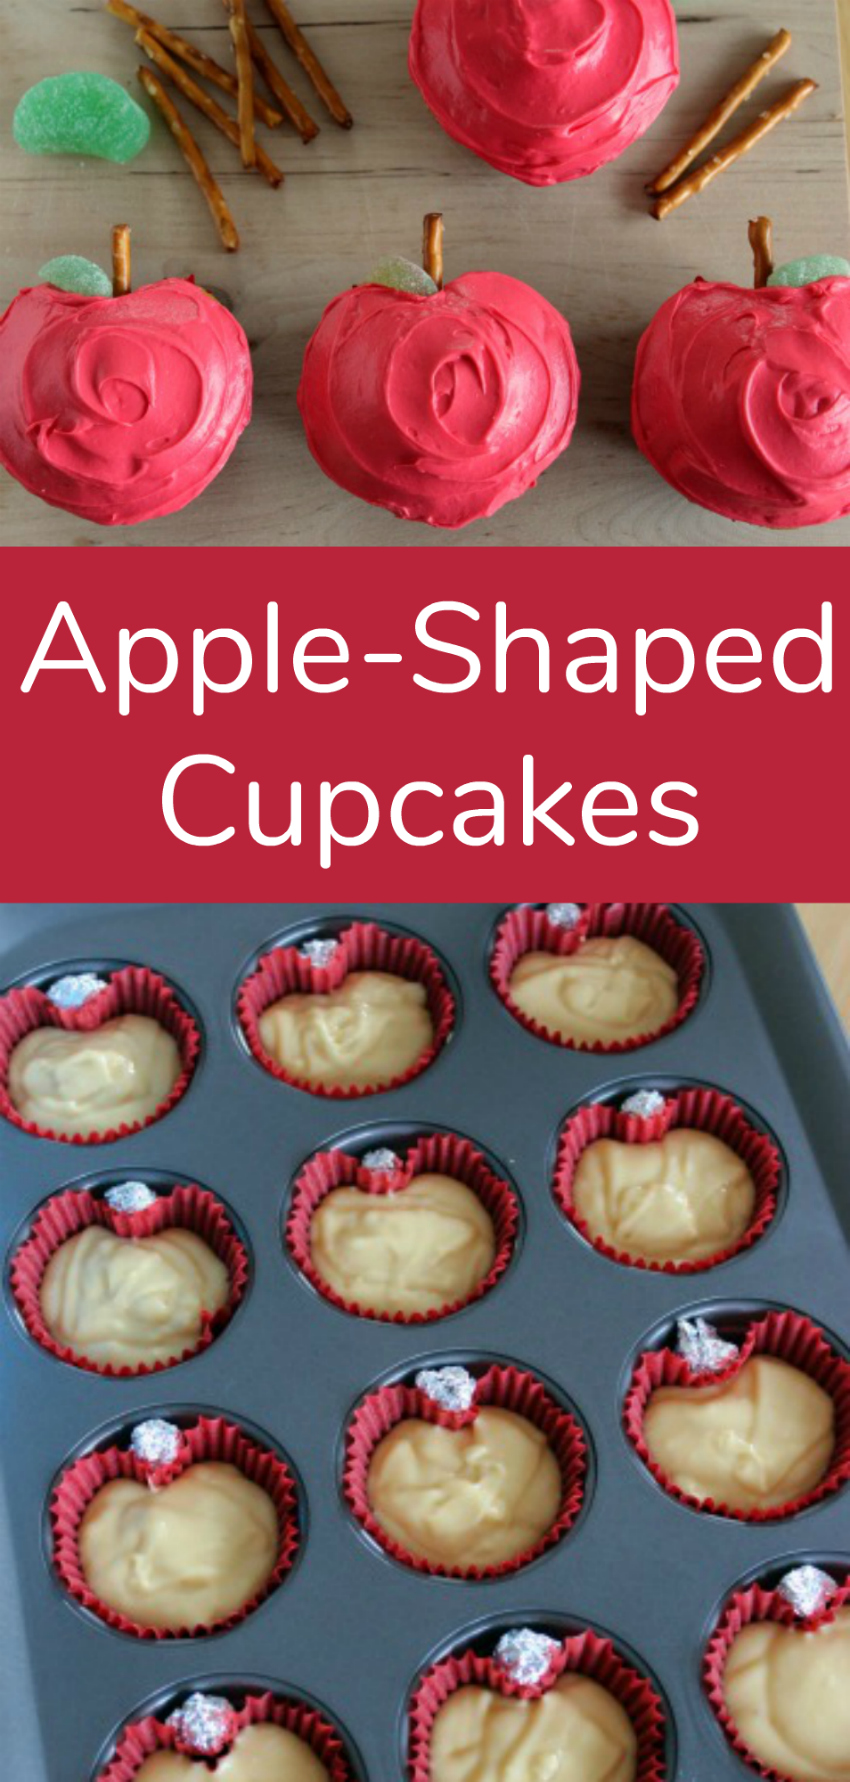 Apple-Shaped Cupcakes to Make